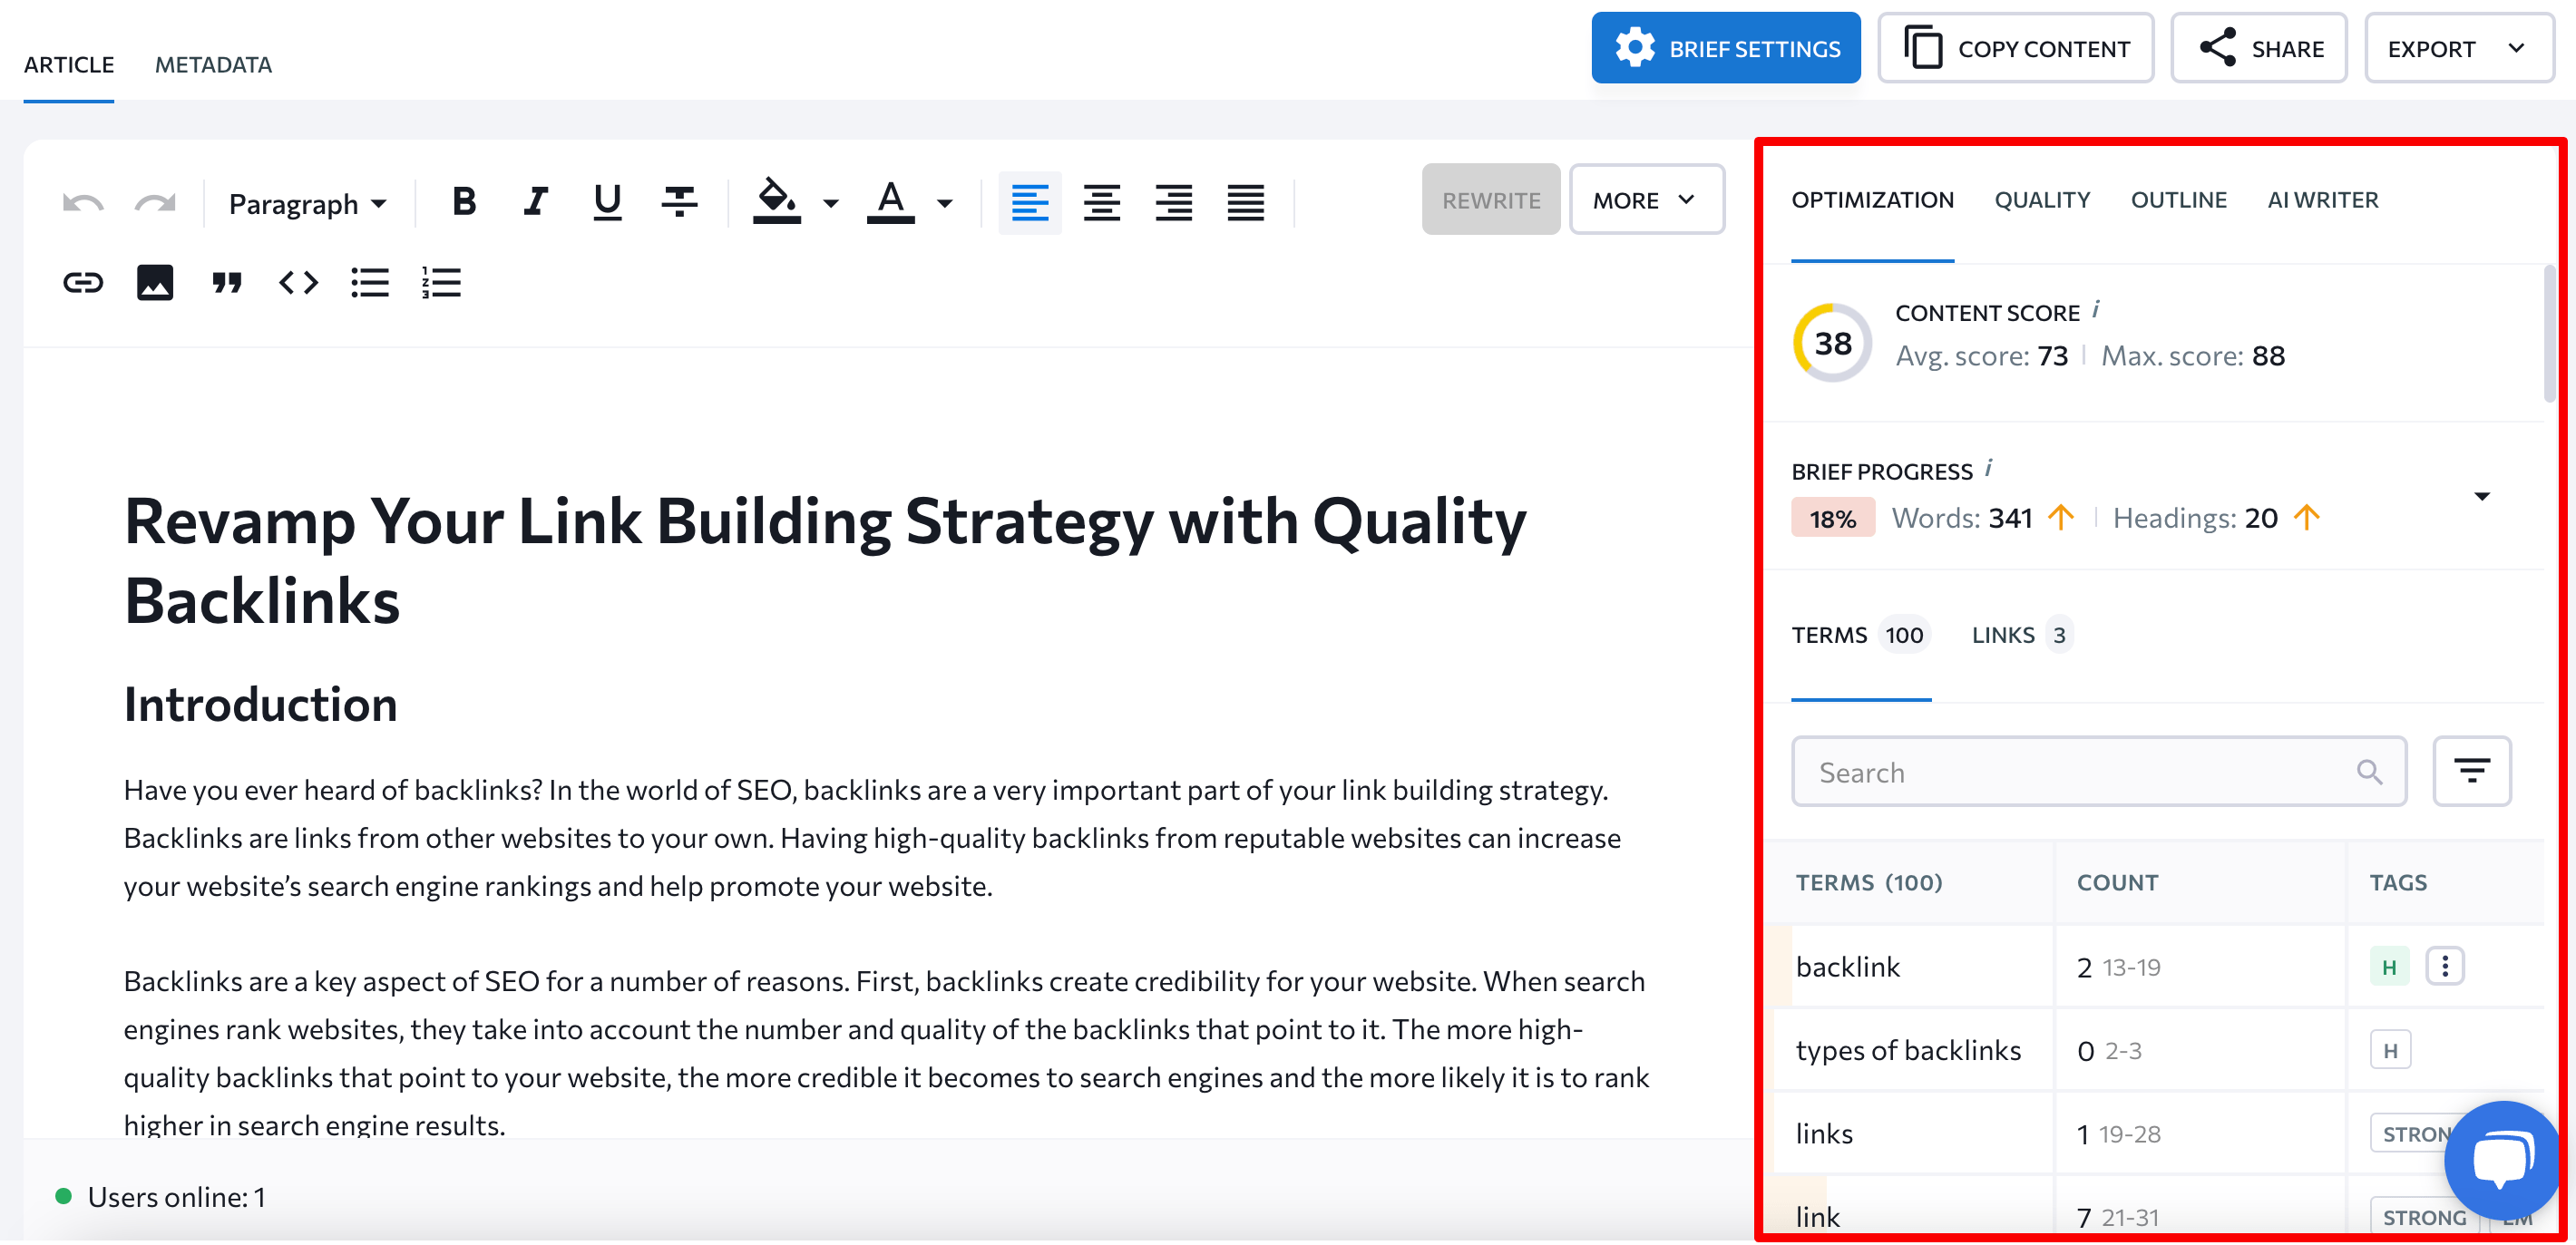 Optimization section in Content Editor